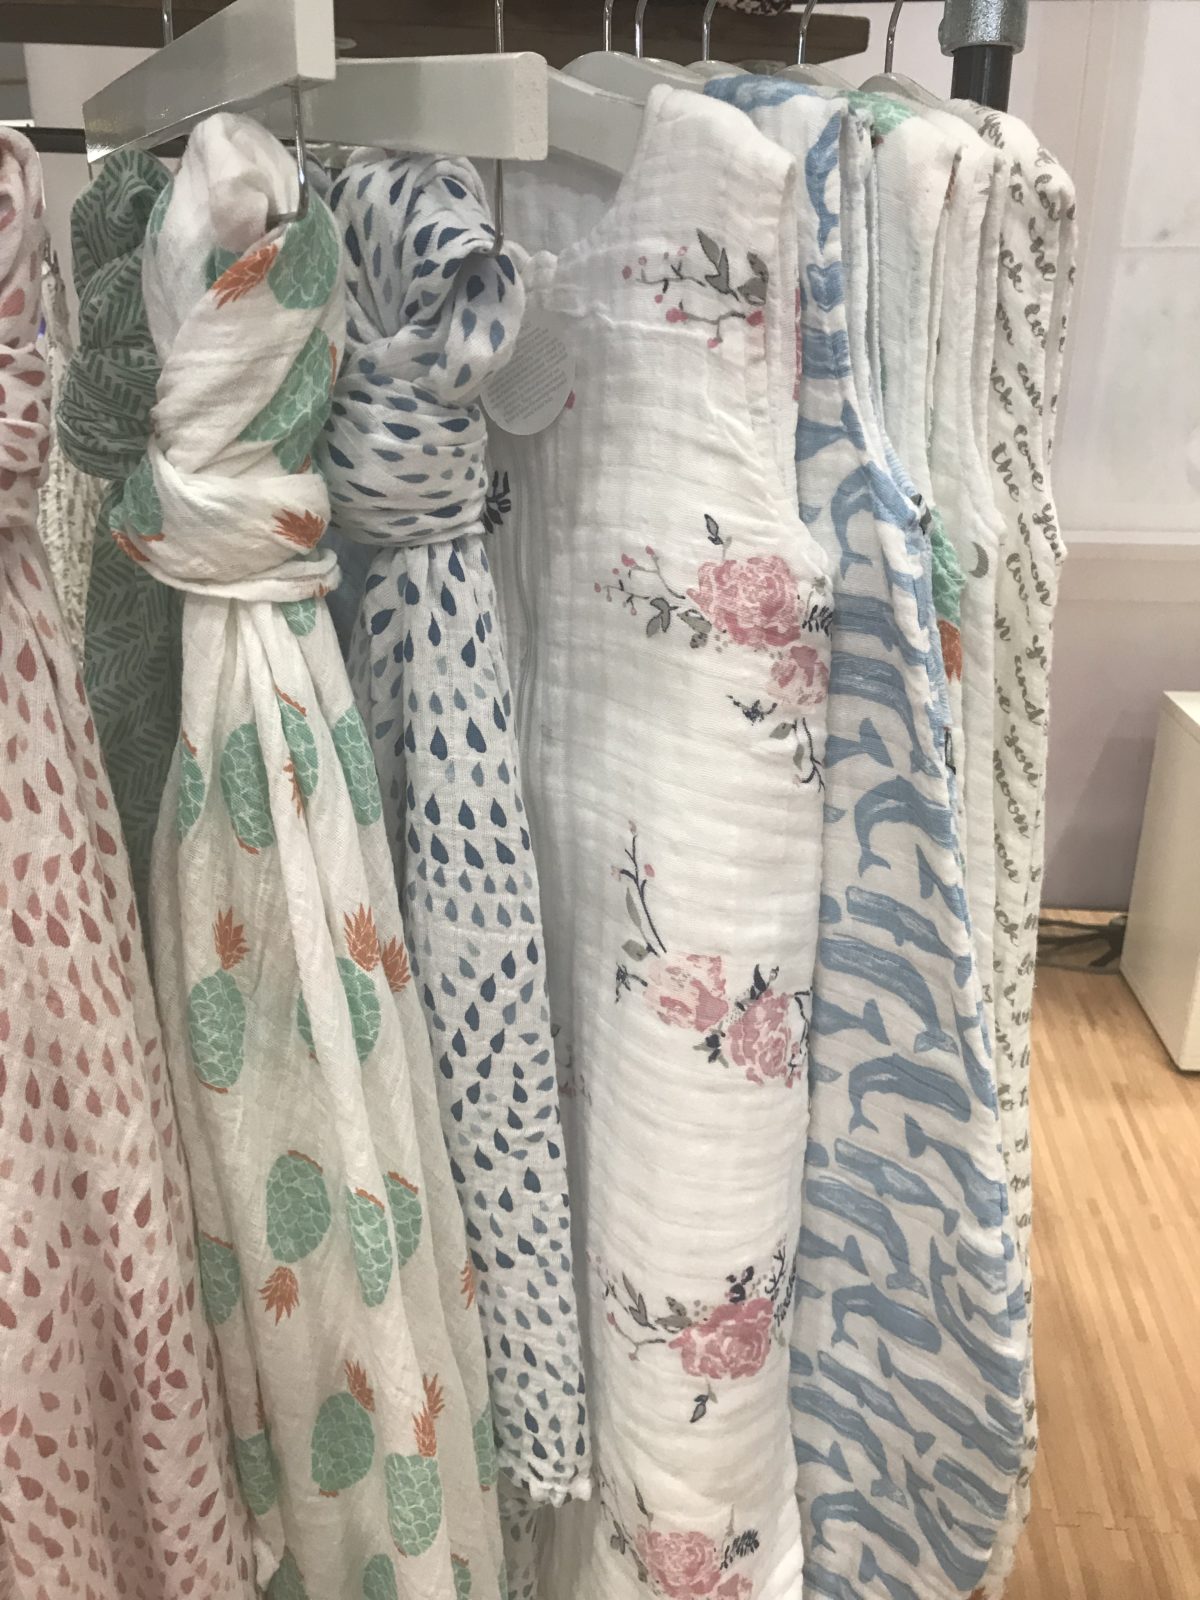 Favorite Finds At The 2018 JPMA Baby Show - The Mama Notes